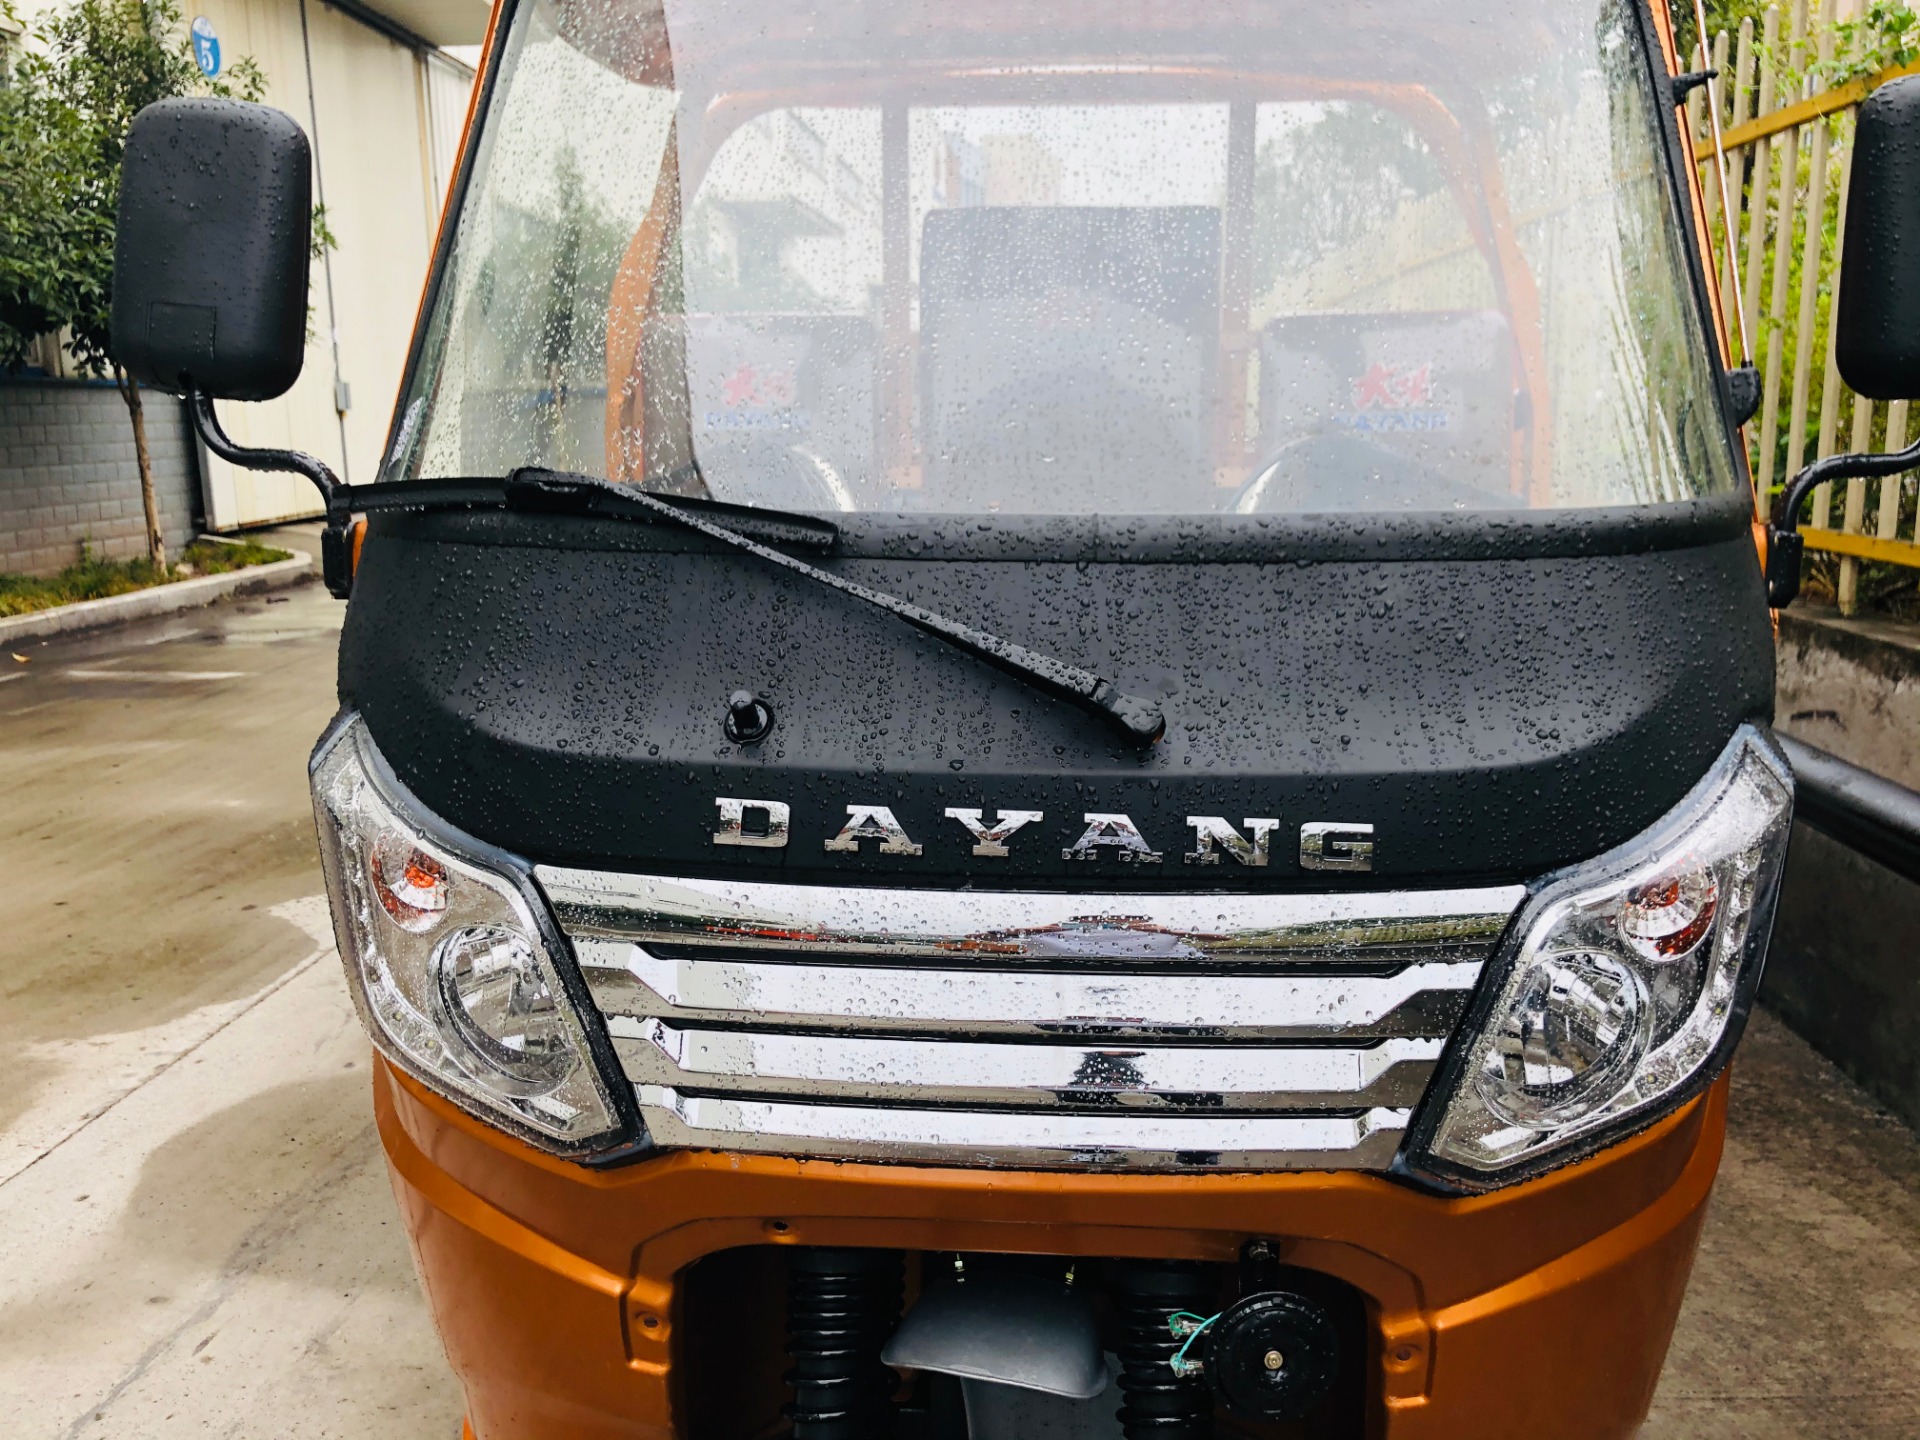 DY-T1 India Bajaj hot selling passenger cargo tricycle  200cc in Africa